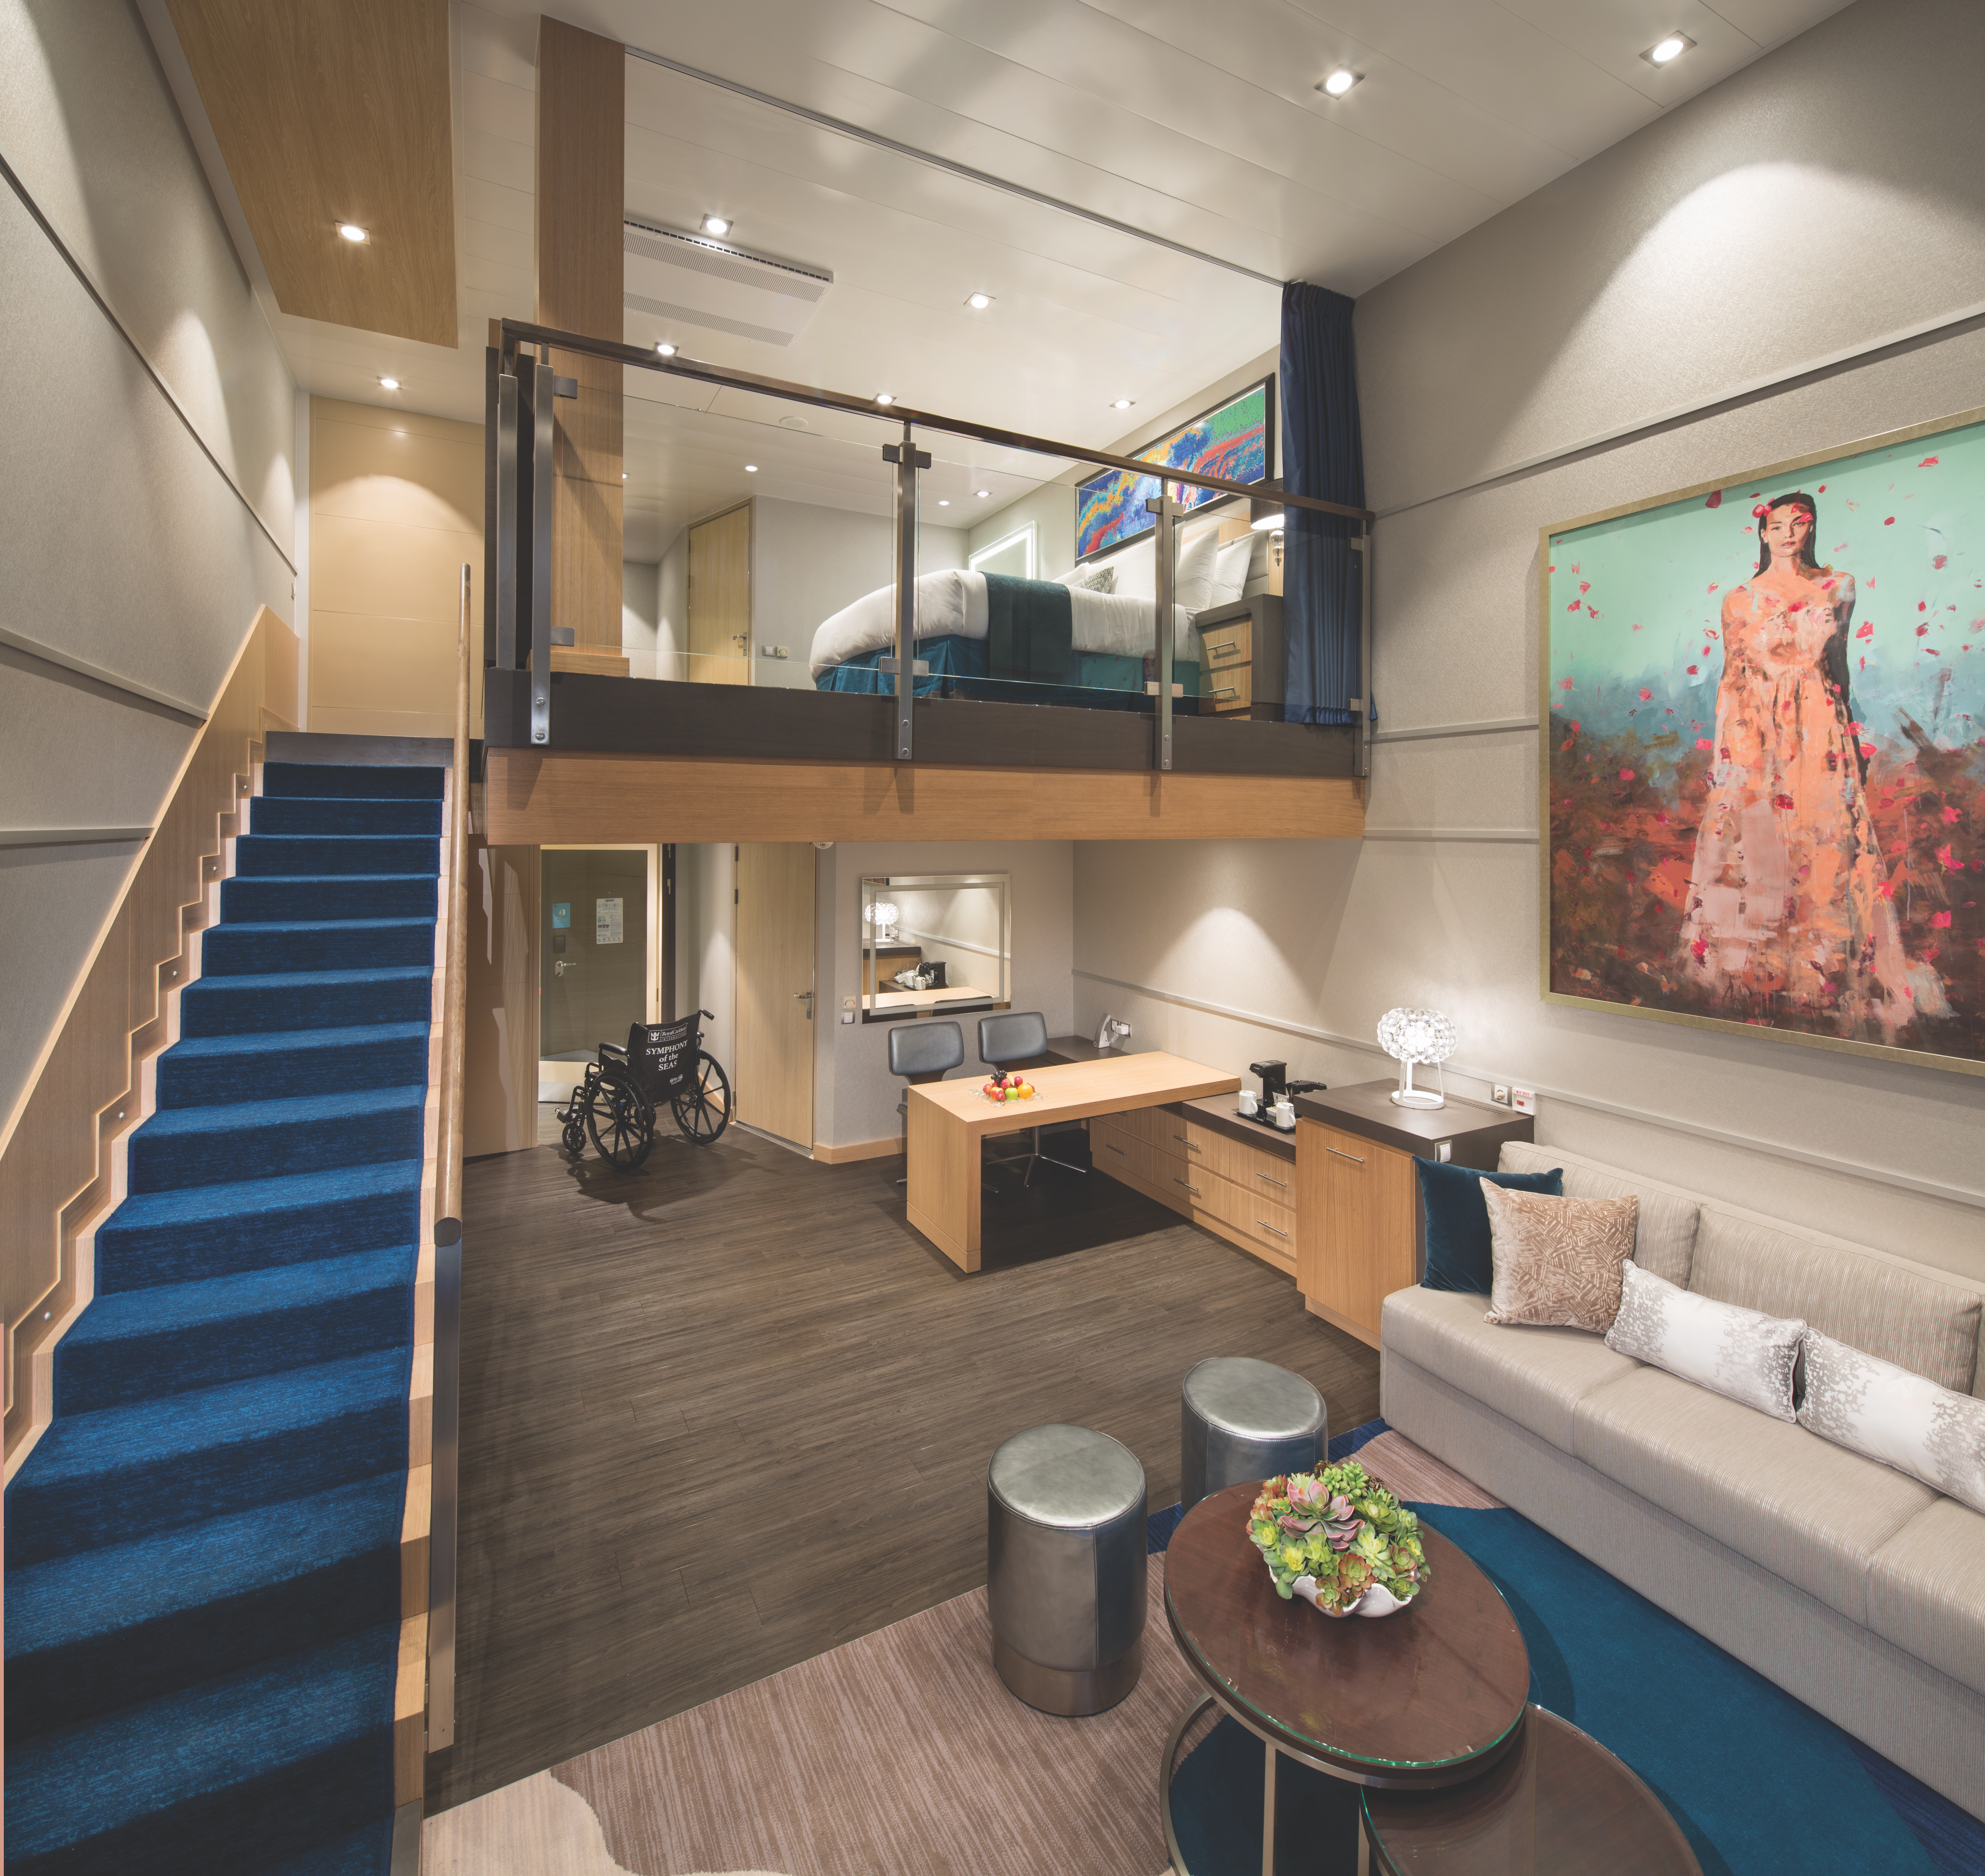 Symphony of the Seas Crown Loft Suite with Balcony